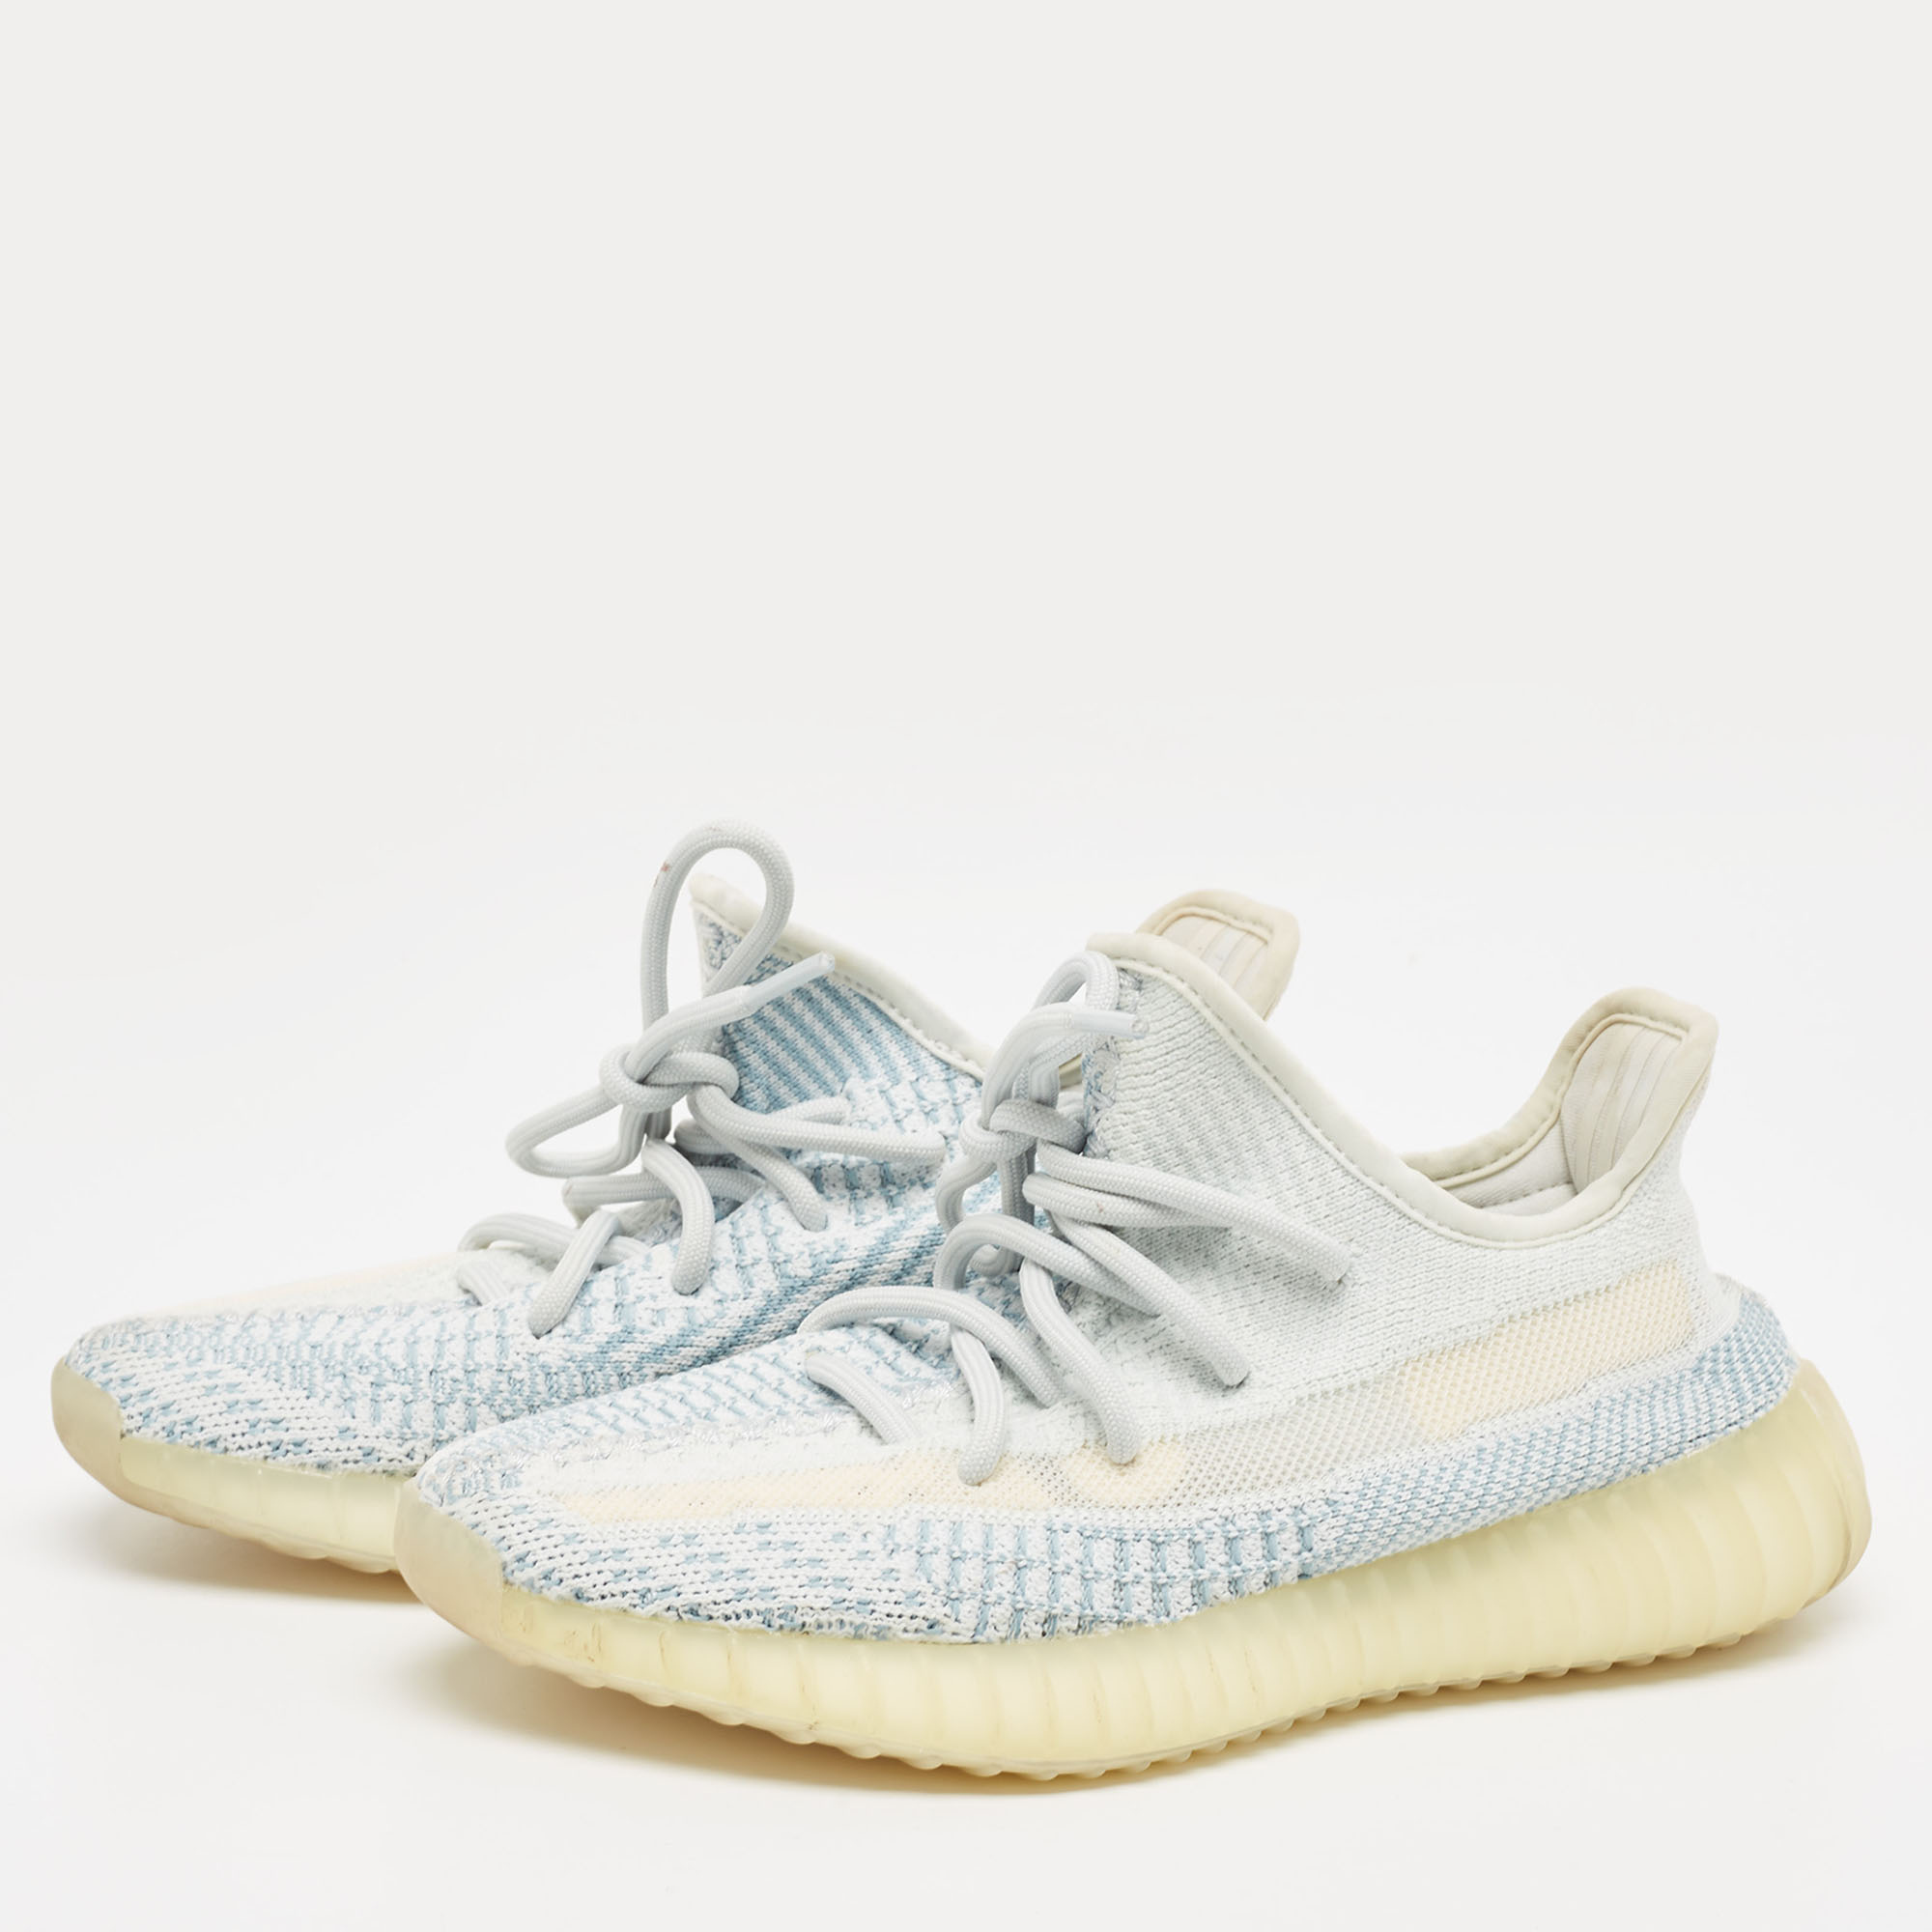 

Yeezy x Adidas Blue/White Knit Fabric Boost 350 V2 Cloud-White Sneakers Size